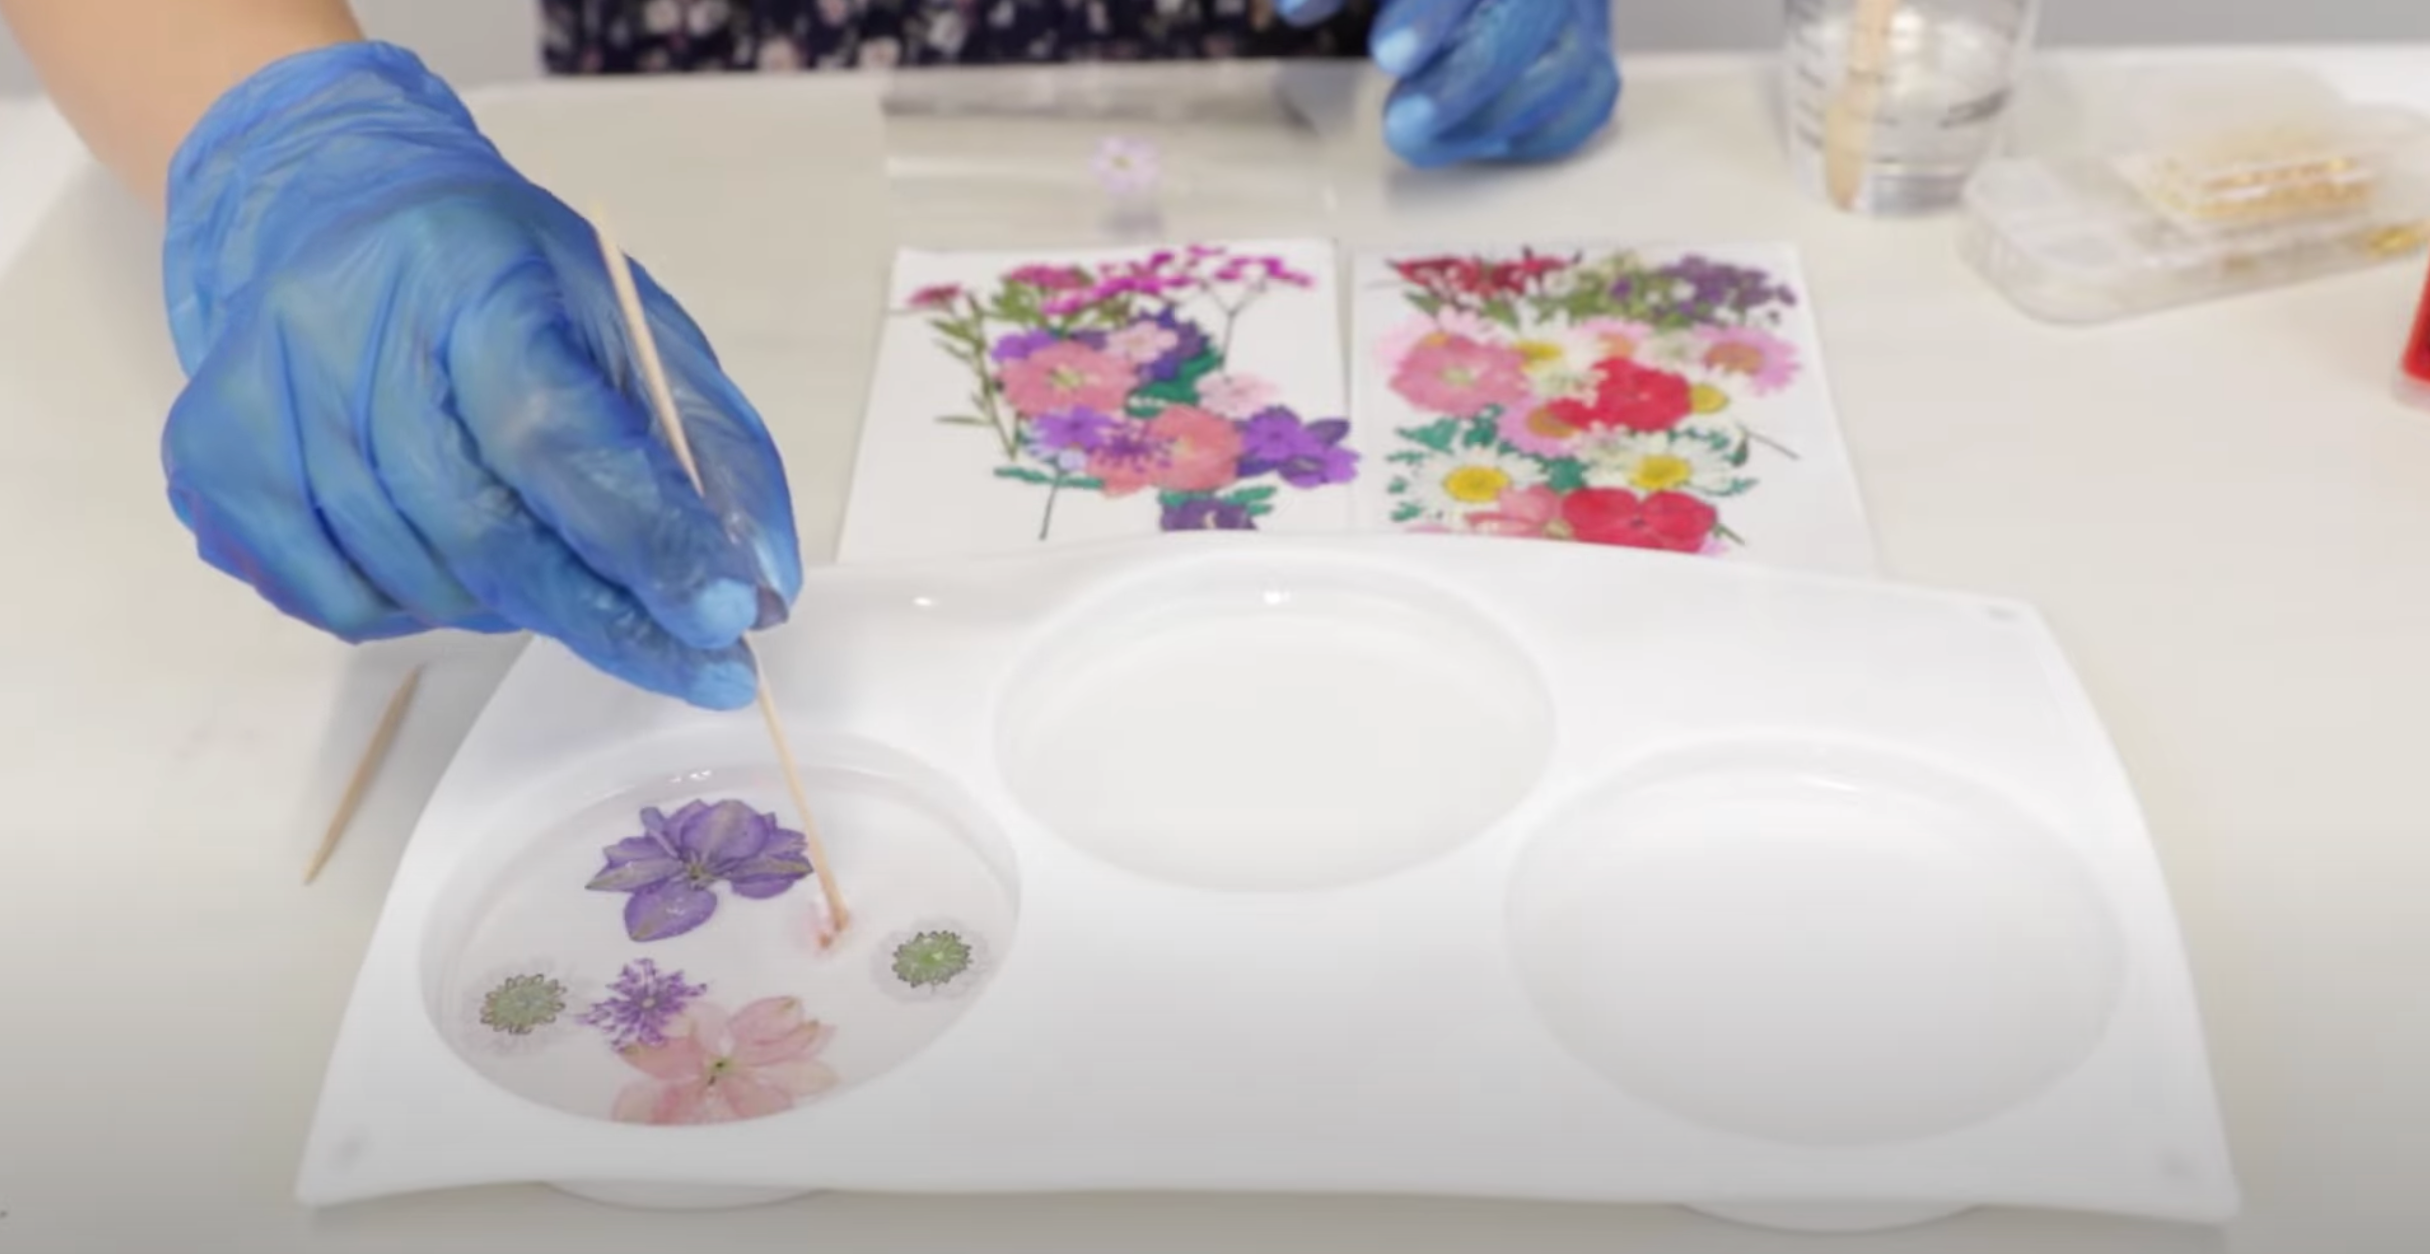 How To Make Resin Wall Art With Dried Flowers – ArtResin